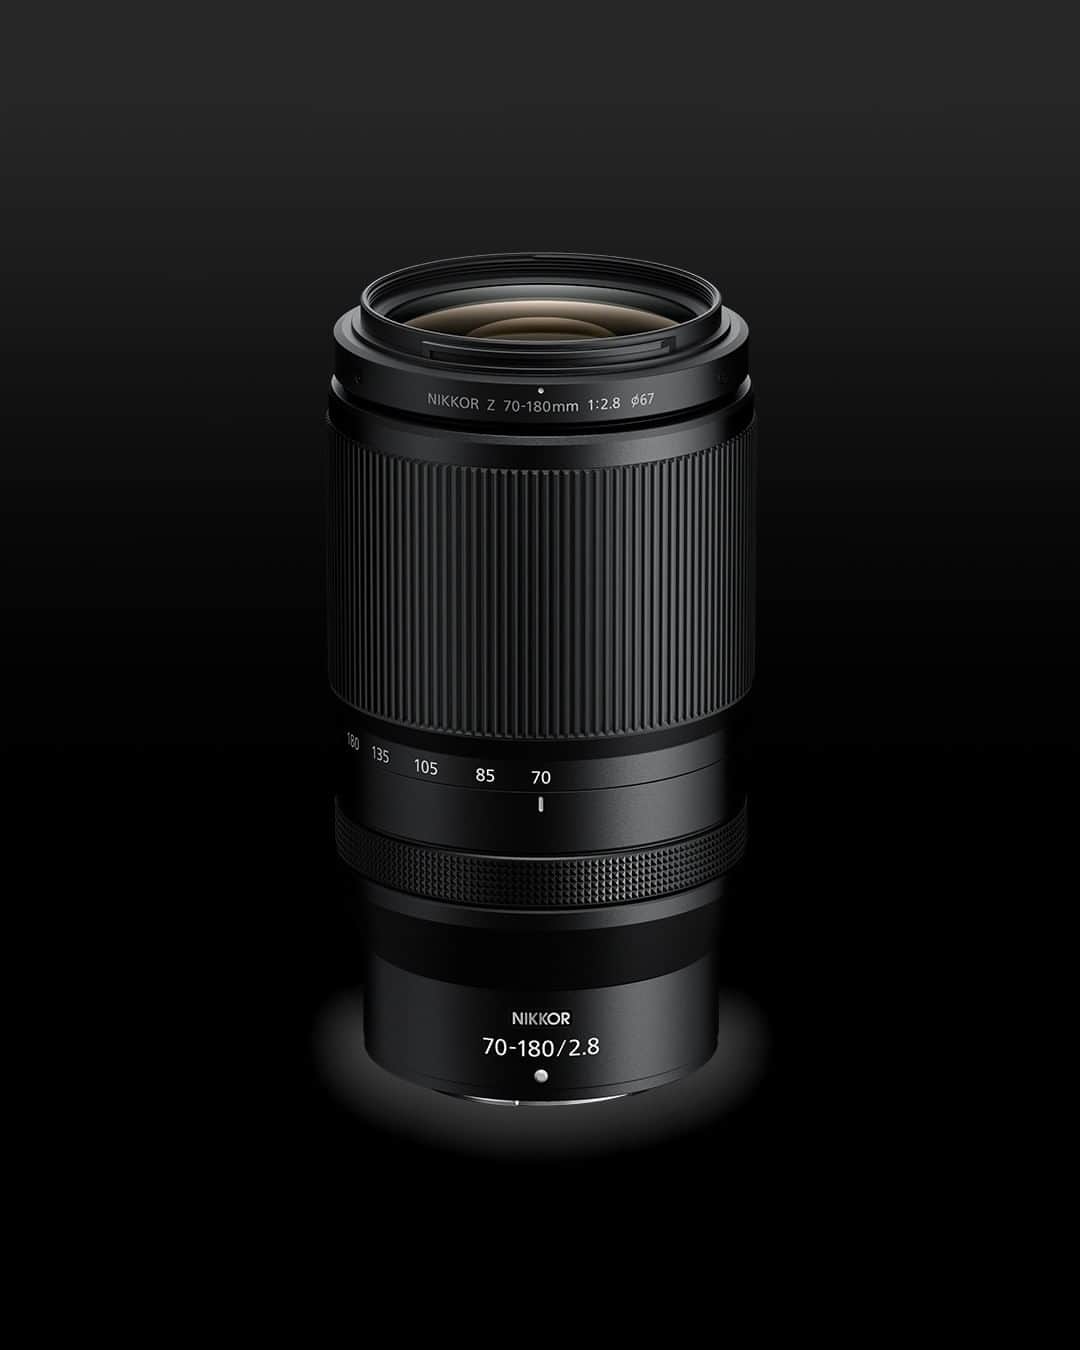 Nikon Australiaのインスタグラム：「#ANNOUNCING: The NIKKOR Z 70-180mm f/2.8. Bright, light, and packed with potential.   Capture stunning details with a versatile zoom range of 70mm to 180mm, suitable for shooting superb images in a wide variety of daily scenarios.   • Large soft bokeh and superb low-light capabilities thanks to an f/2.8 constant aperture • Minimum focus distancing of 0.27m for close-up shots • Achieve stable and quiet focusing thanks to the stepping motor (STM) • Weighing just 795g, this lens is over 500g lighter than the NIKKOR Z 70-200mm f/2.8 VR S  • Thanks to a smooth control ring, achieve steady focus changes when capturing video   Pre-order today via the link in bio.   #Nikon #NikonAustralia #MyNikonLife #WideAngleLens #SportPhotography #WildlifePhotography #NIKKOR #NIKKORZ #ZSeries」